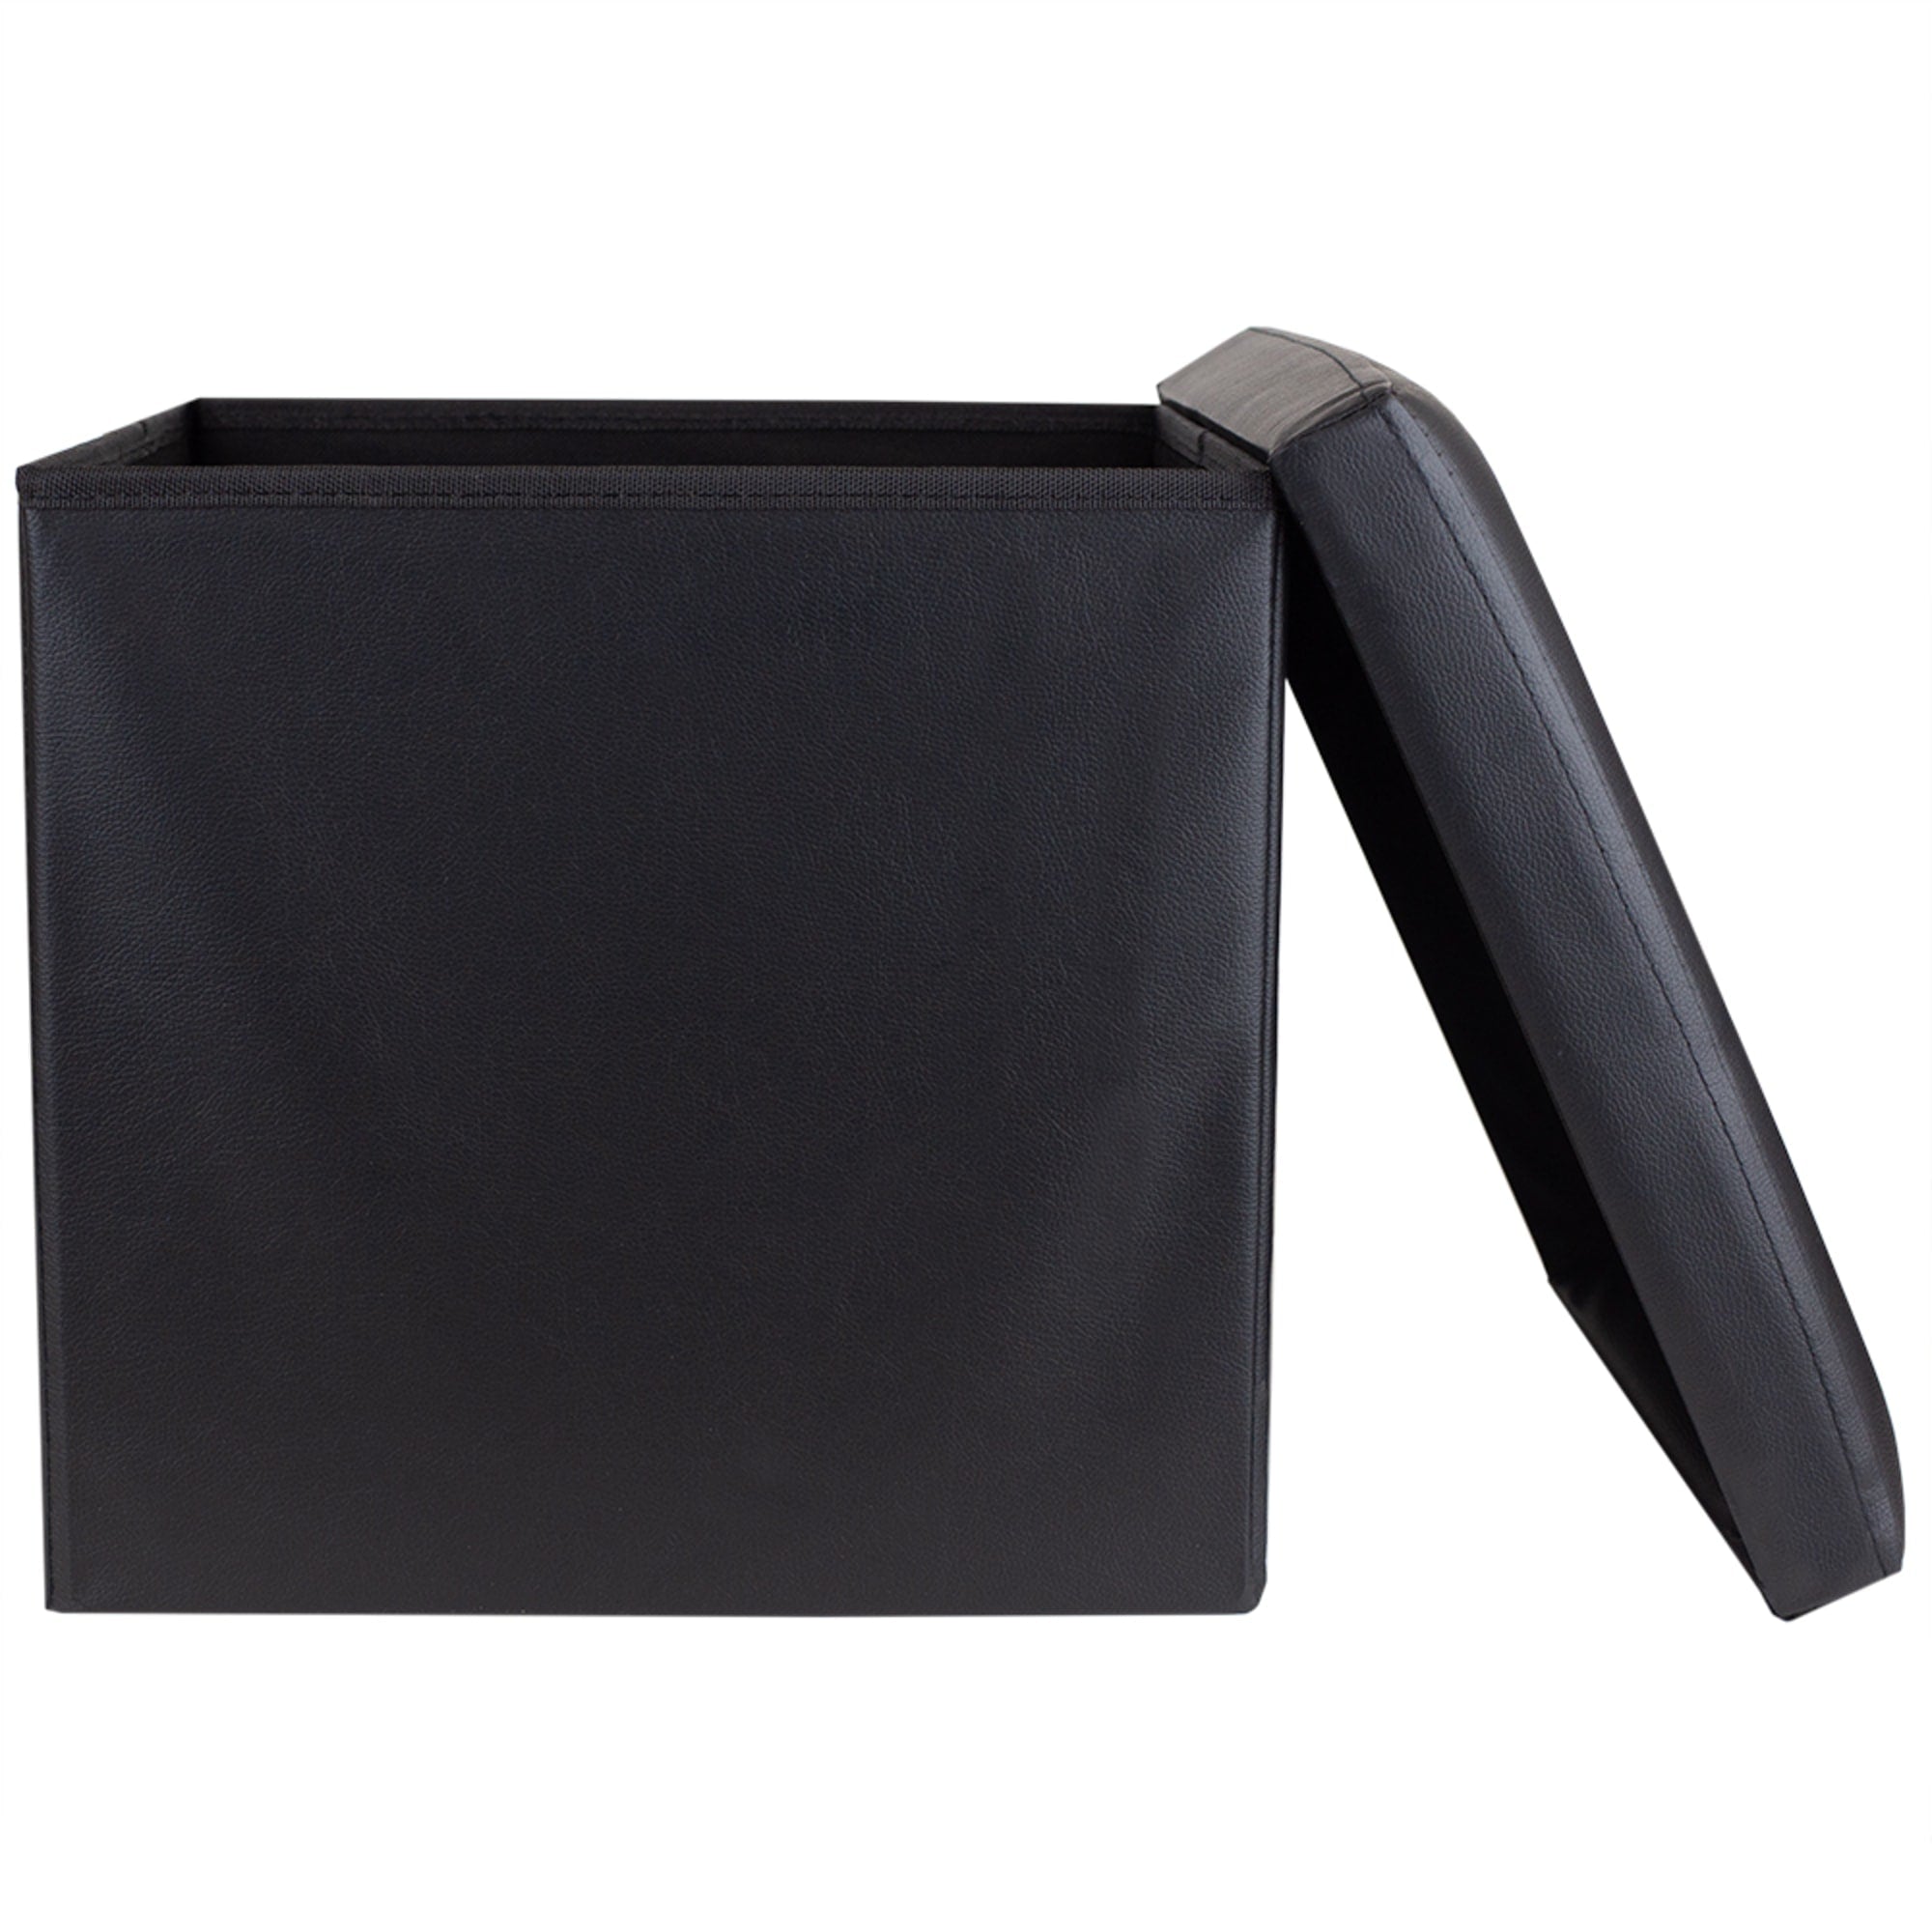 Home Basics Faux Leather Storage Cube, Black $12.00 EACH, CASE PACK OF 6